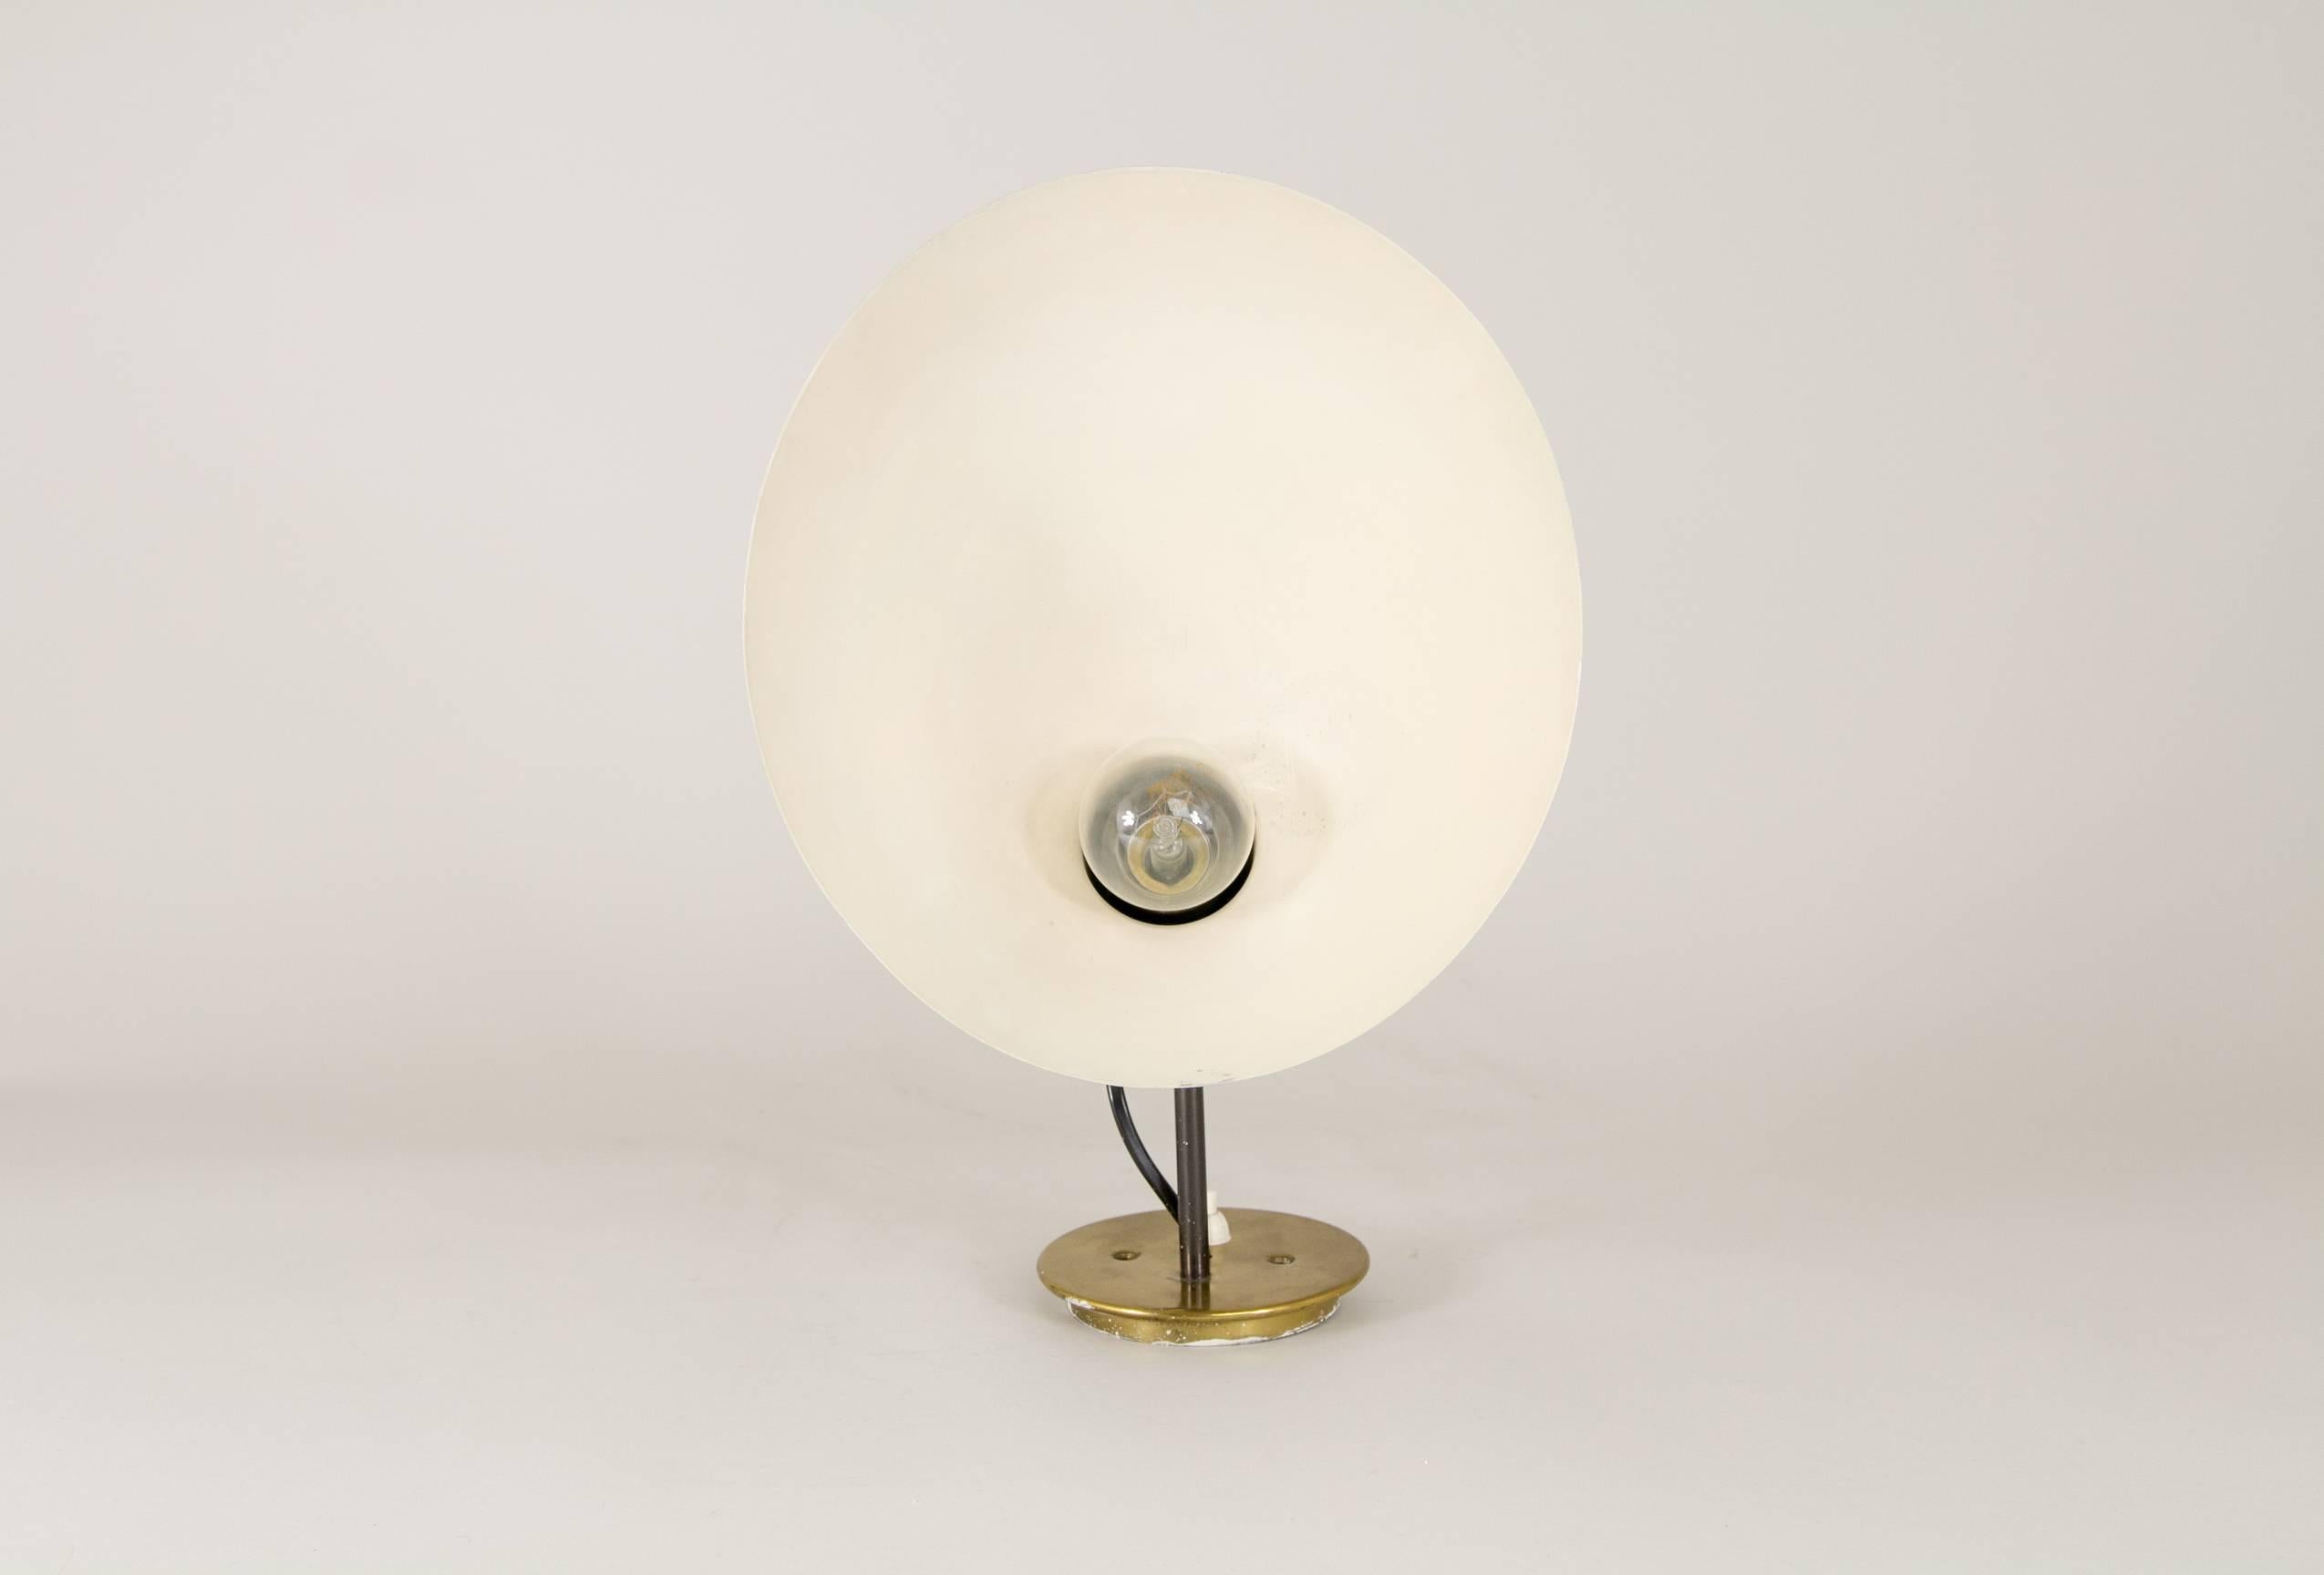 Mid-20th Century Adjustable Wall Lamp by Vittoriano Viganò for Arteluce, 1950s